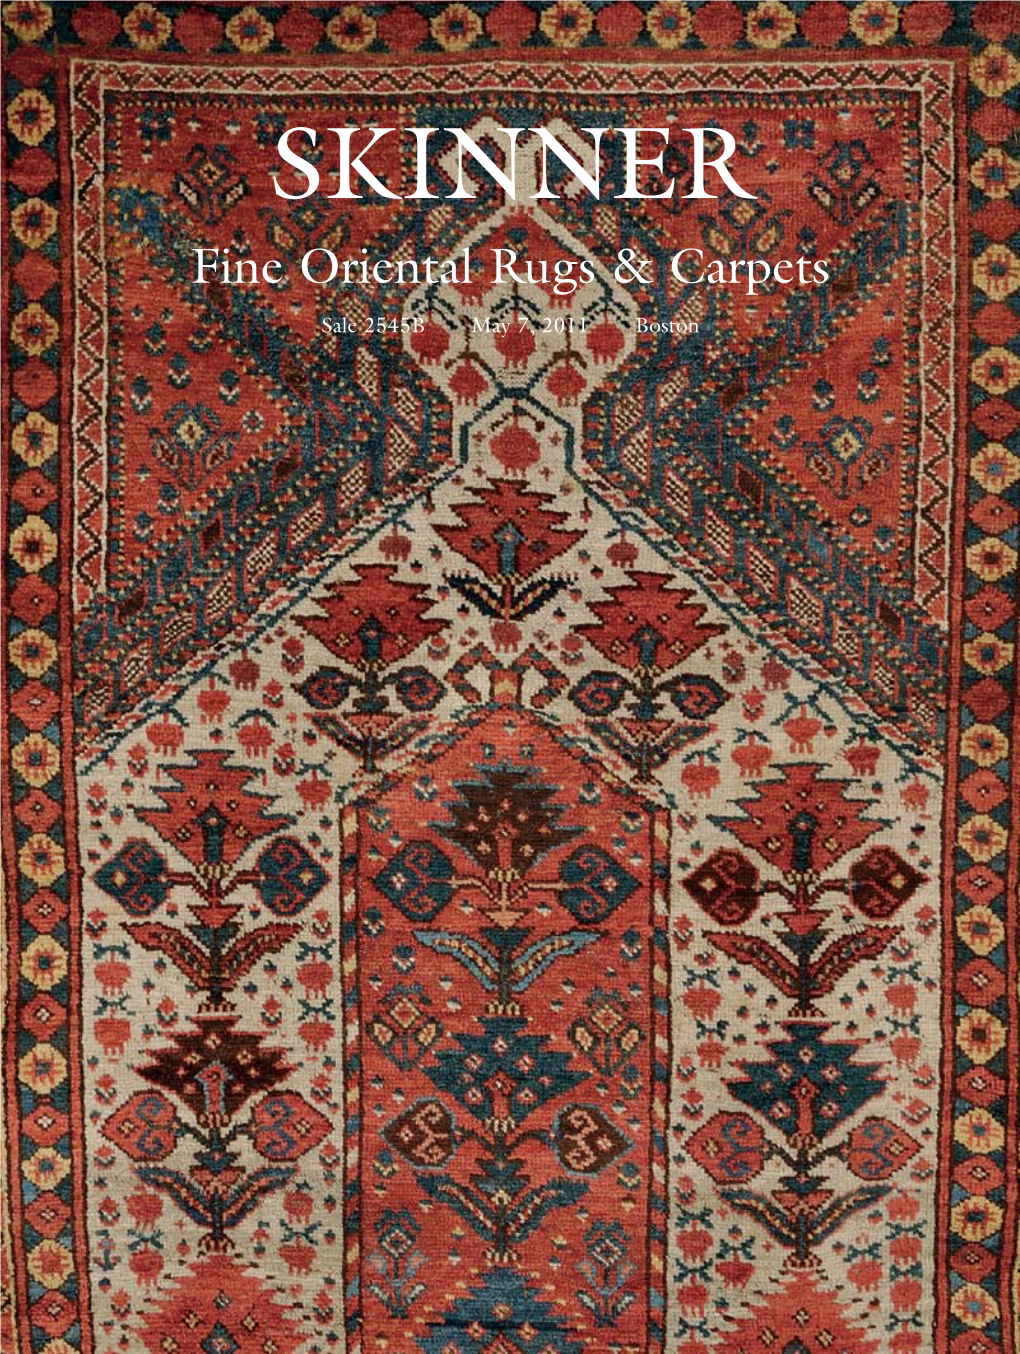 SKINNER Fine Oriental Rugs & Carpets Sale 2545B May 7, 2011 Boston Upcoming Auction